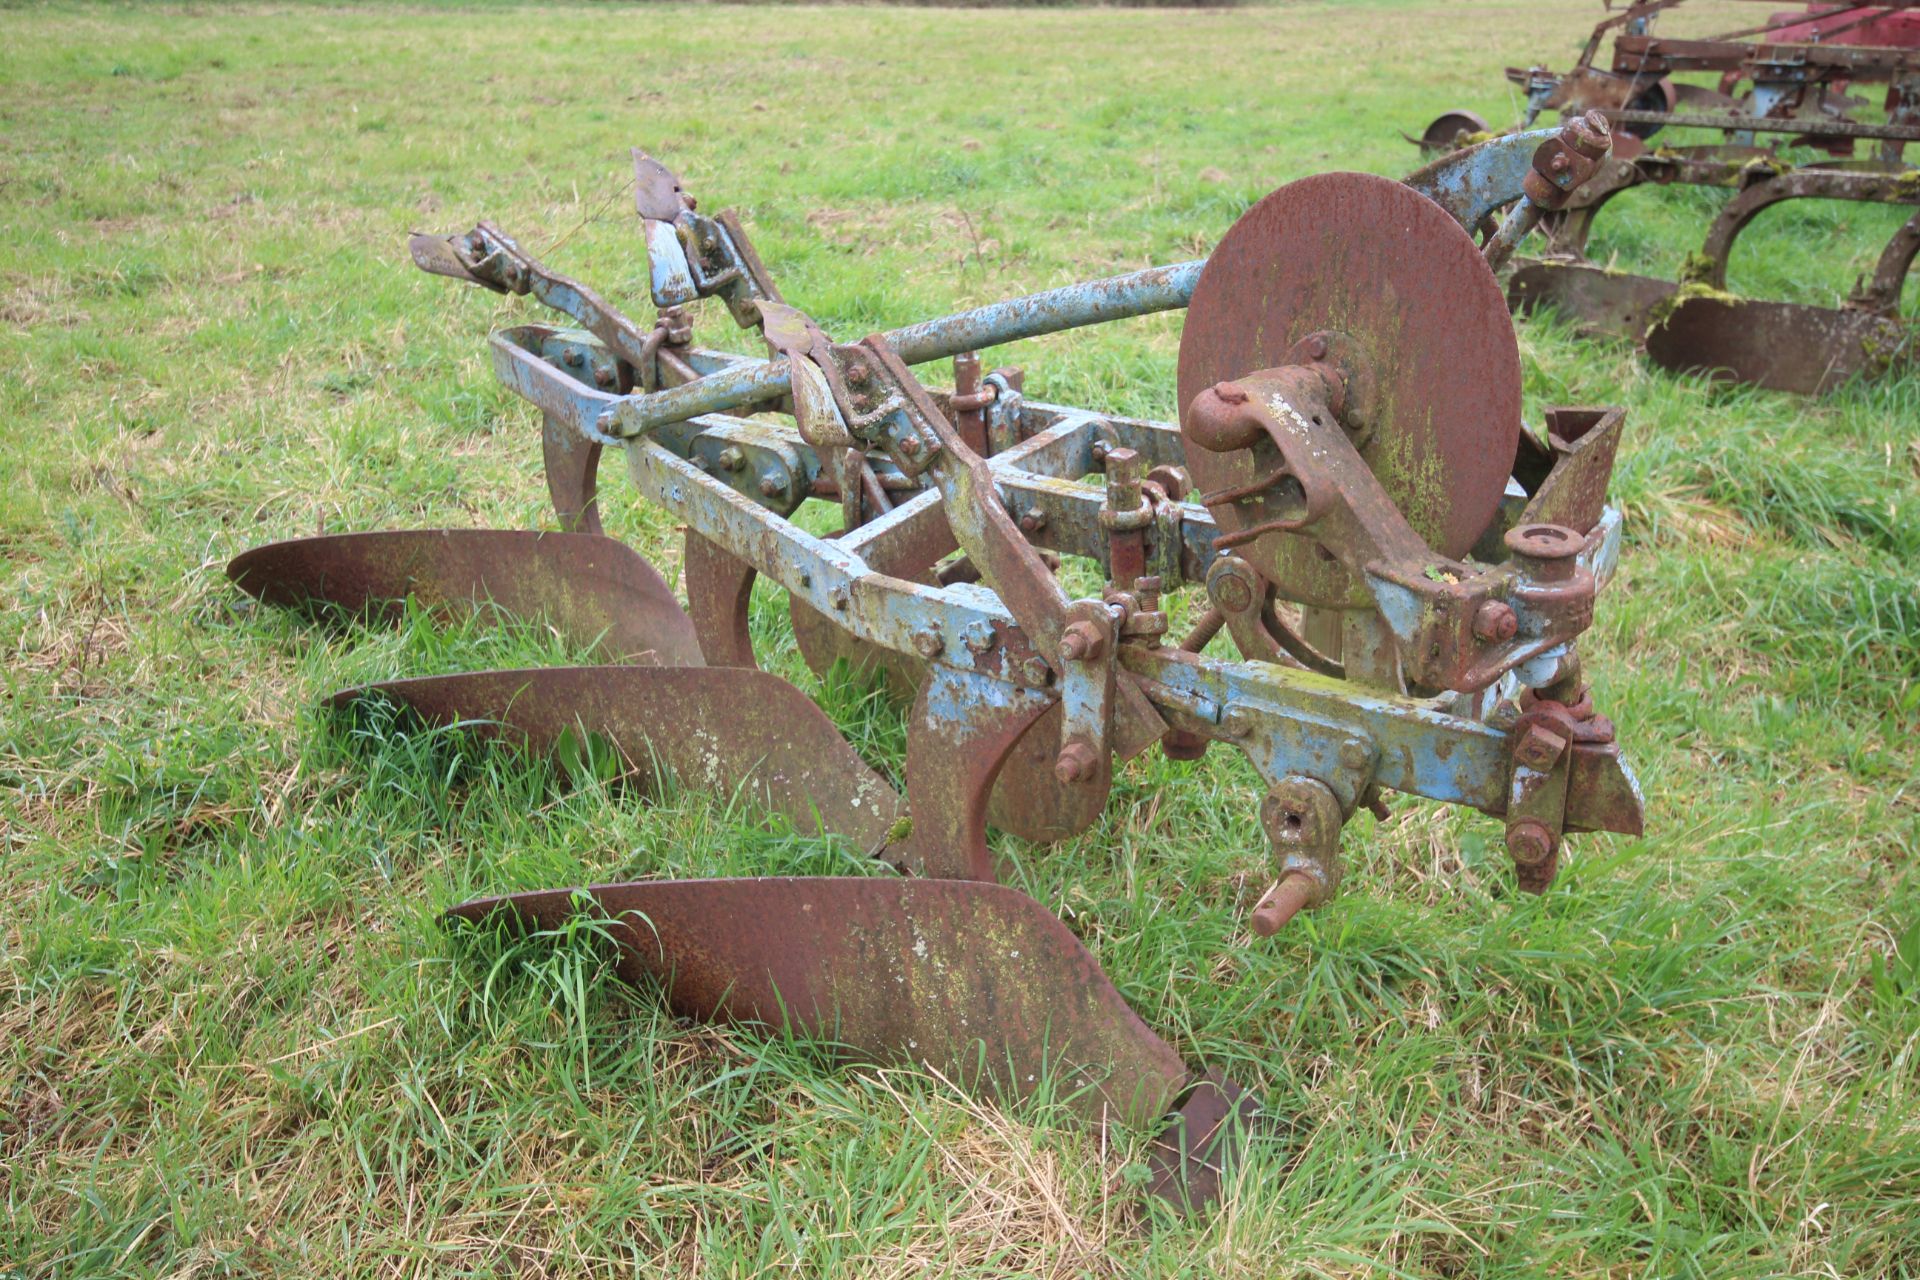 Ransomes TS59N 3 furrow conventional plough. With YL bodies, discs and skimmers. Owned from new.